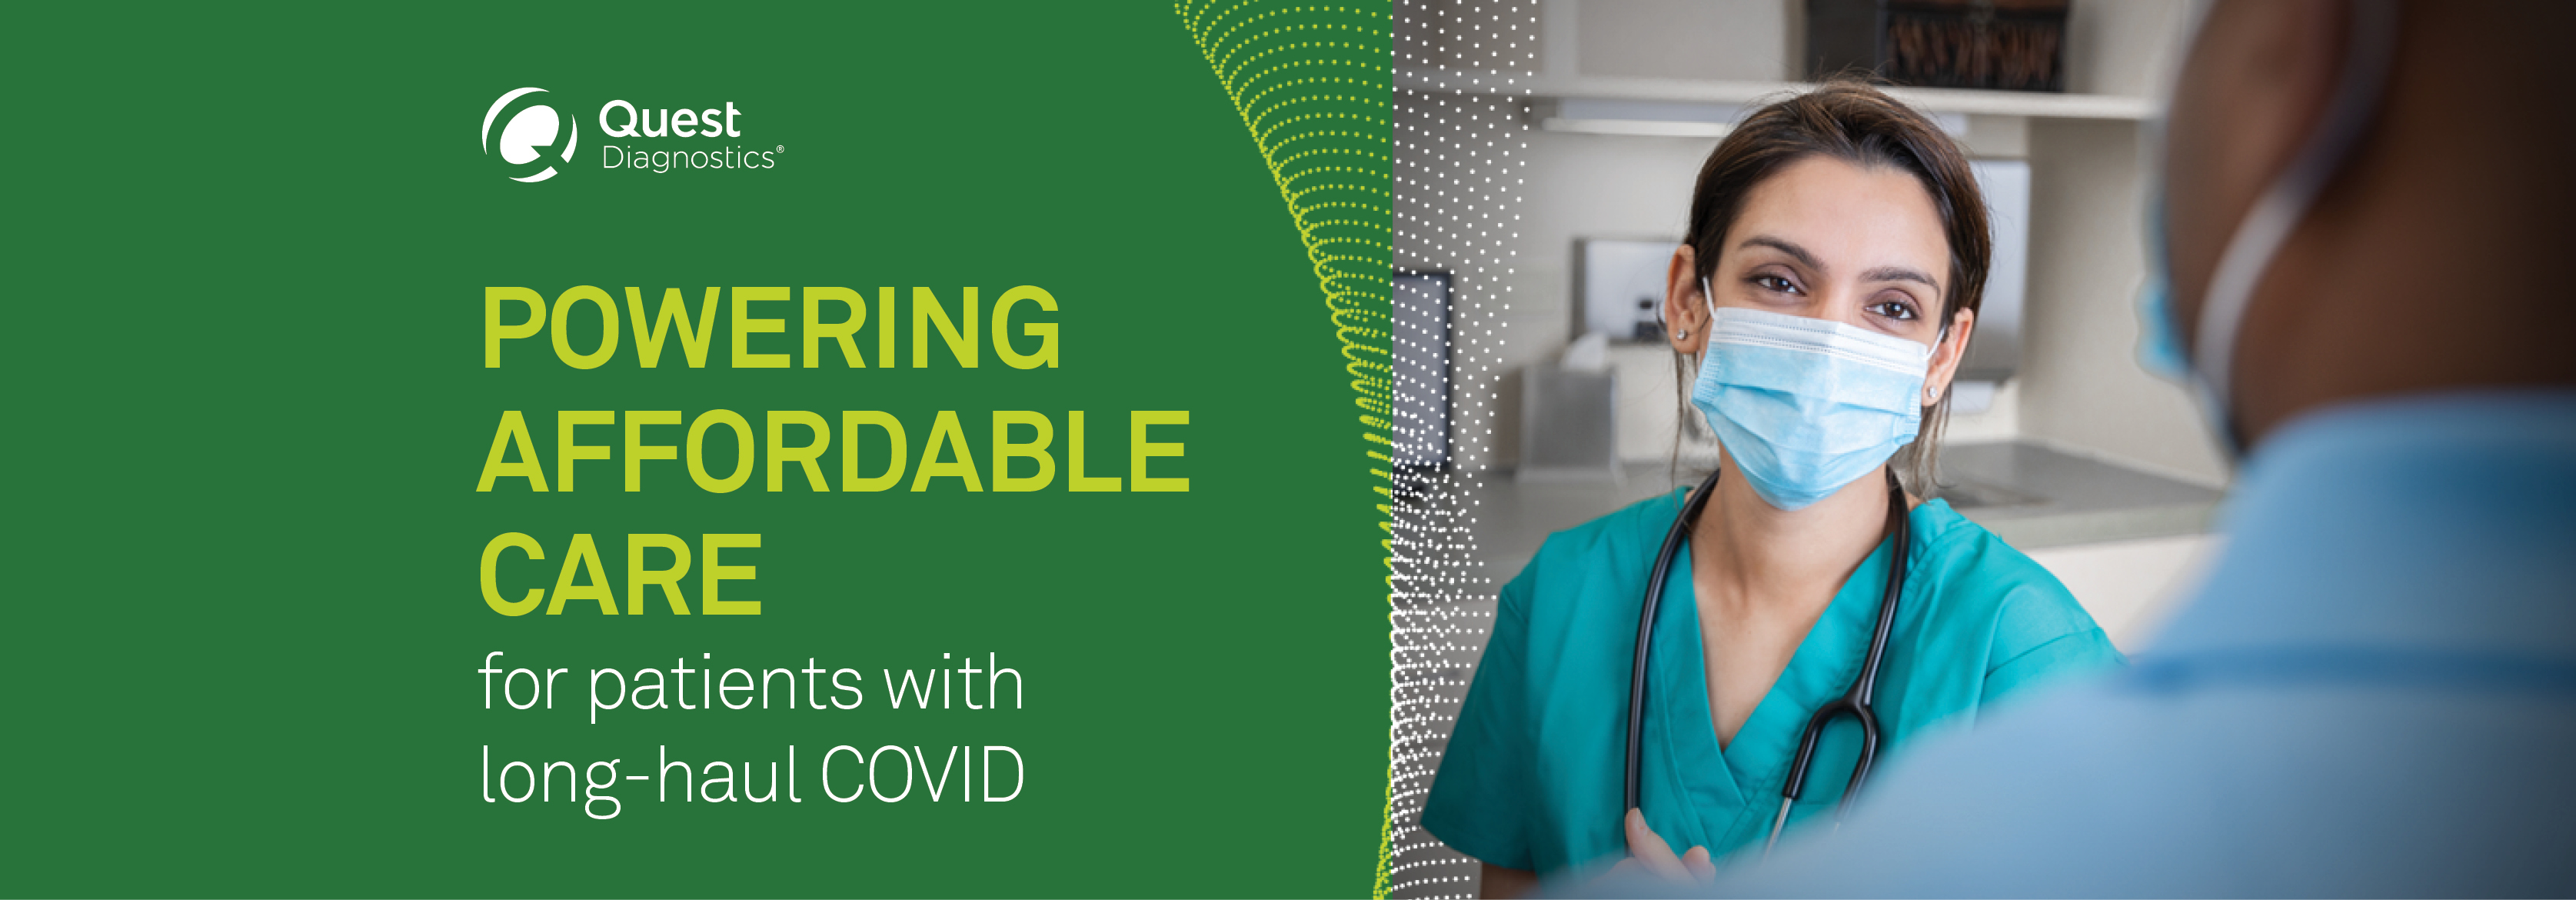 POWERING AFFORDABLE CARE for patients with long-haul COVID